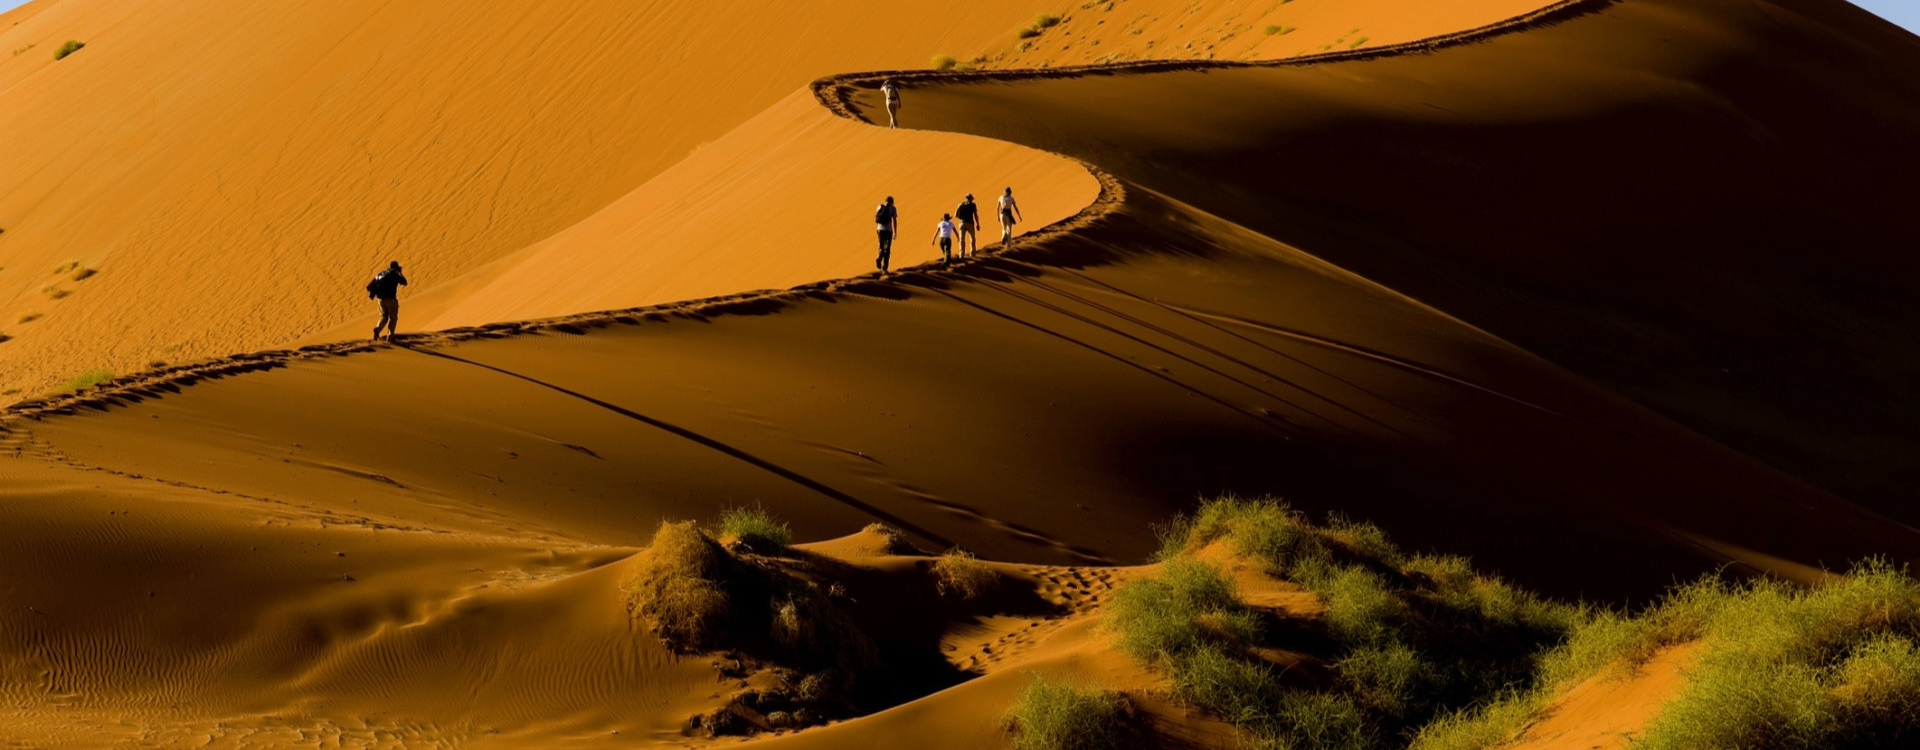 Things To Do In Namibia